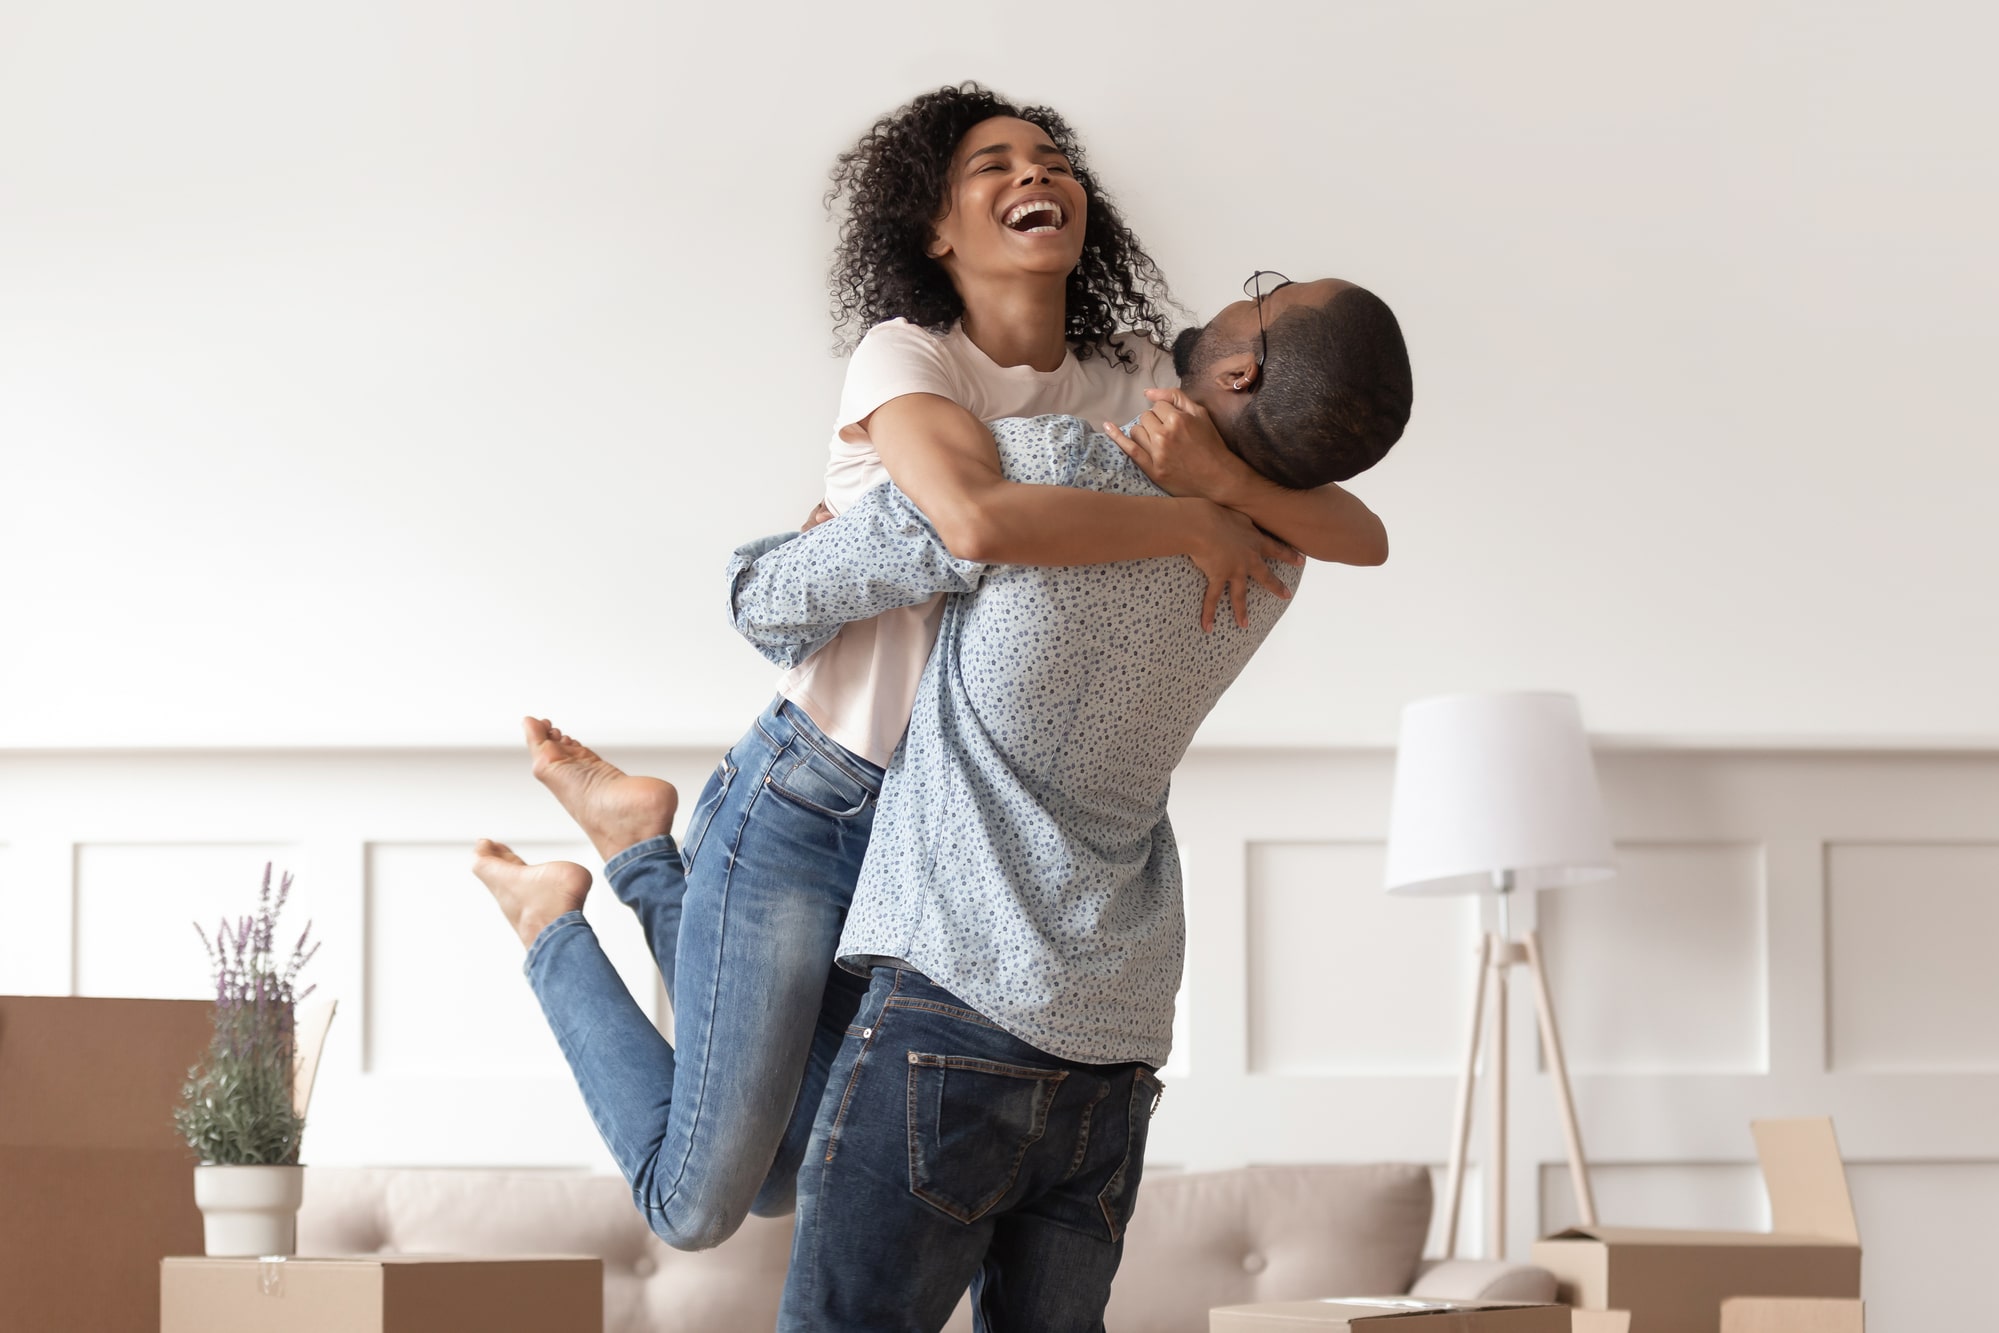 African husband lifting happy wife laughing celebrating moving day with boxes, excited first time home buyers renters owners having fun enjoy relocation into own new flat house, mortgage investment